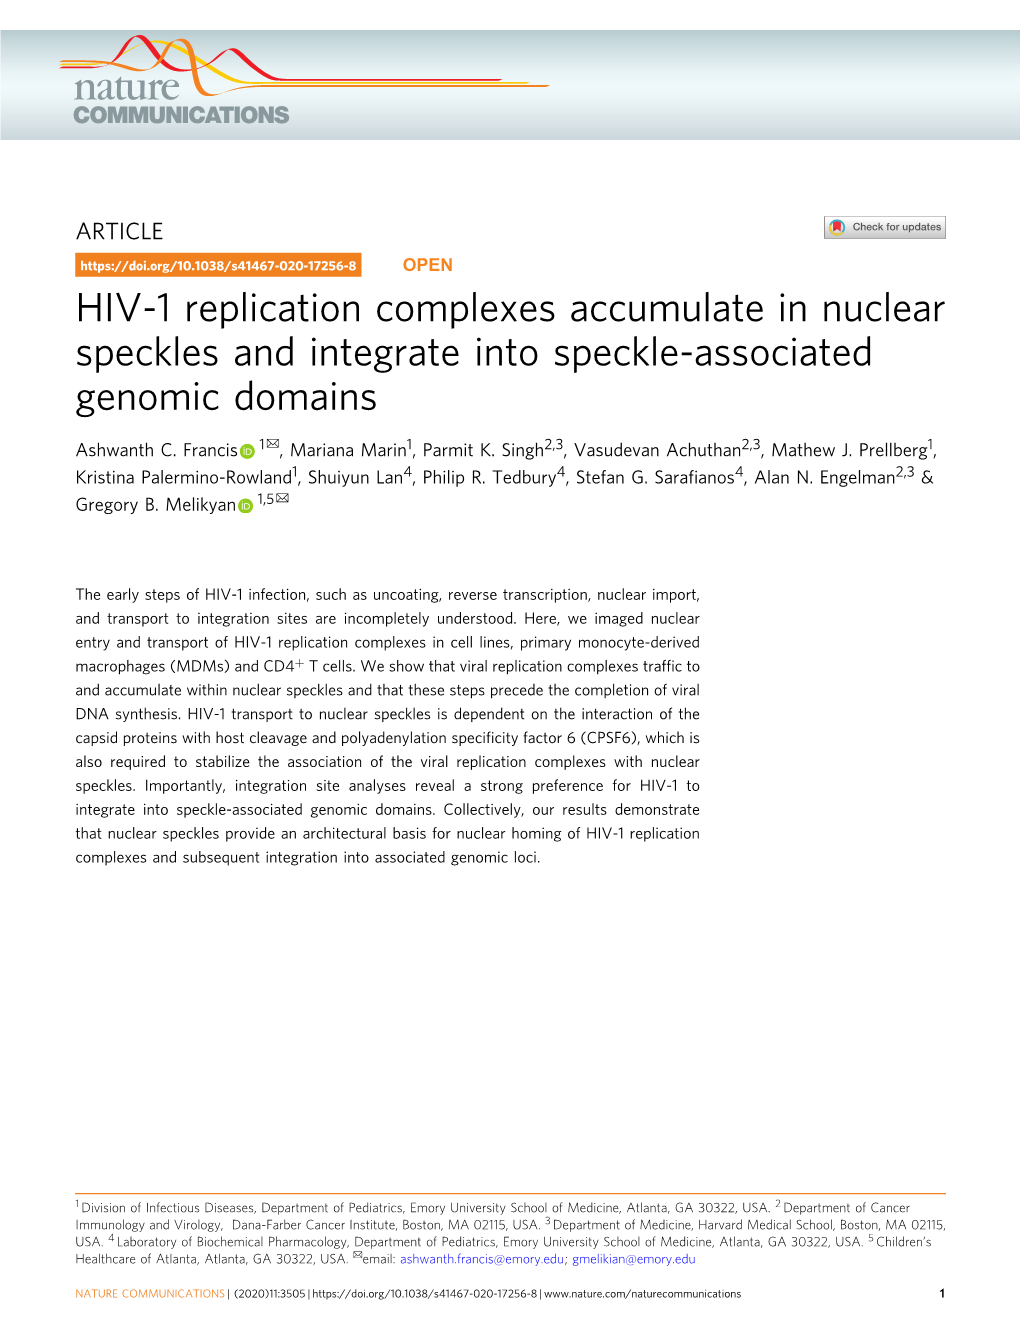 HIV-1 Replication Complexes Accumulate in Nuclear Speckles and Integrate Into Speckle-Associated Genomic Domains ✉ Ashwanth C